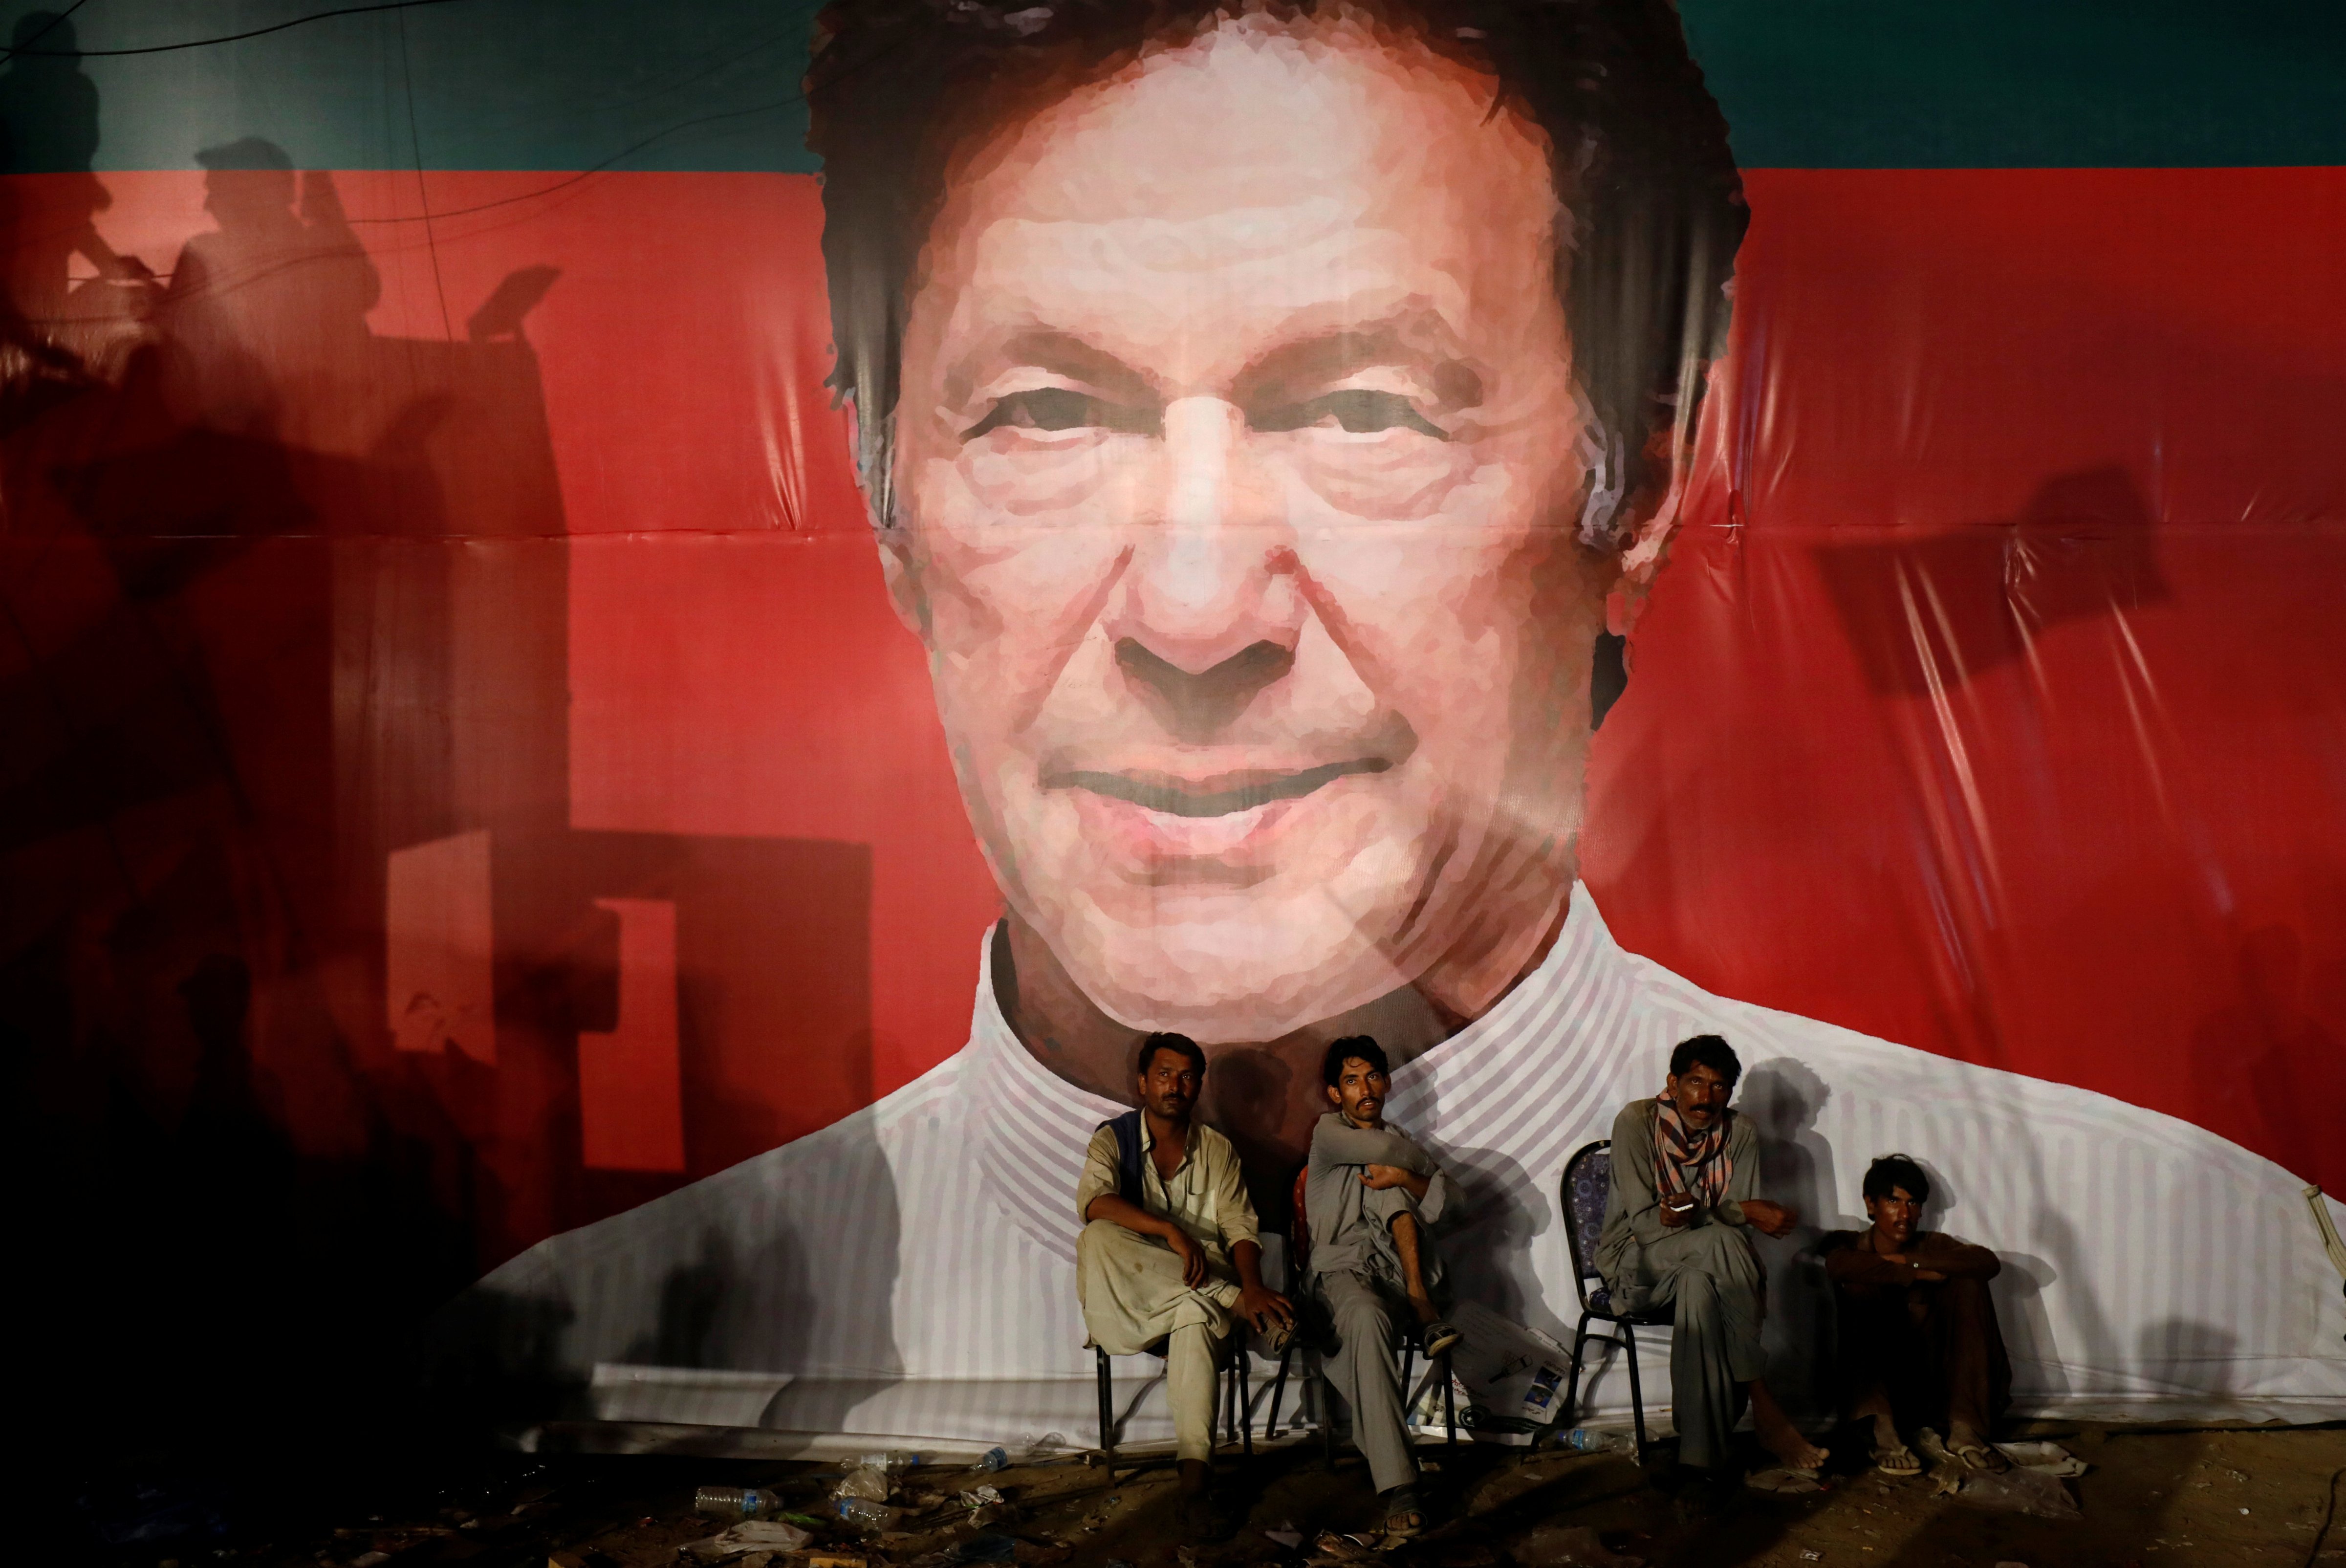 Labourers, who set up the venue, sit under a wall with a billboard displaying photo of Imran Khan, chairman of the Pakistan Tehreek-e-Insaf (PTI), political party, as they listen to him during a campaign rally ahead of general elections in Karachi